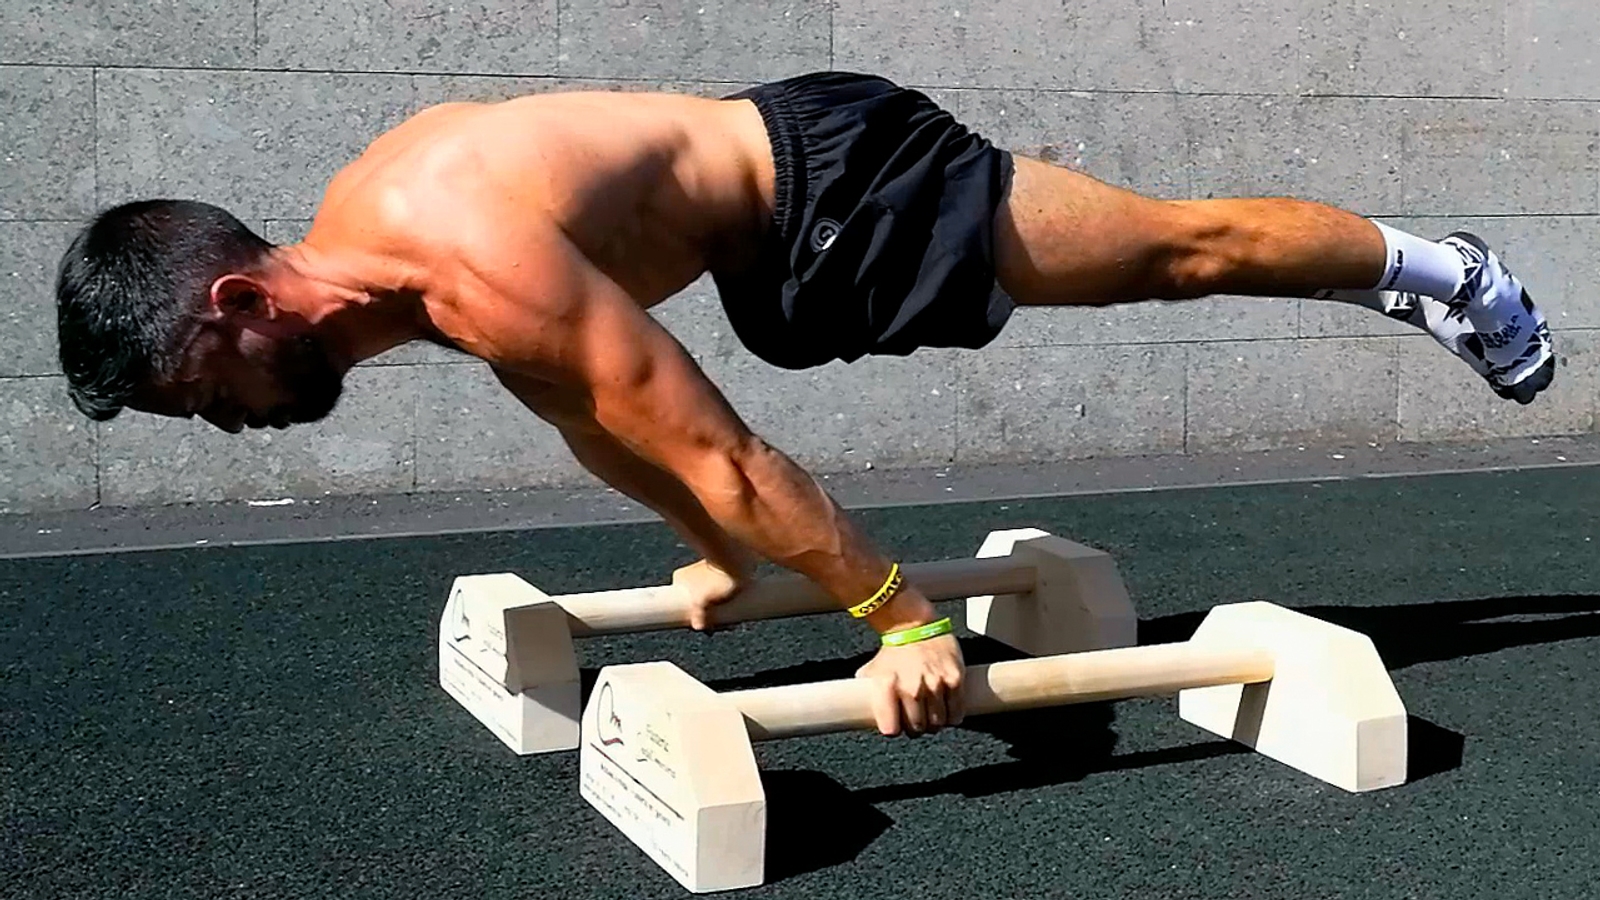 In-depth analysis of the planche exercise